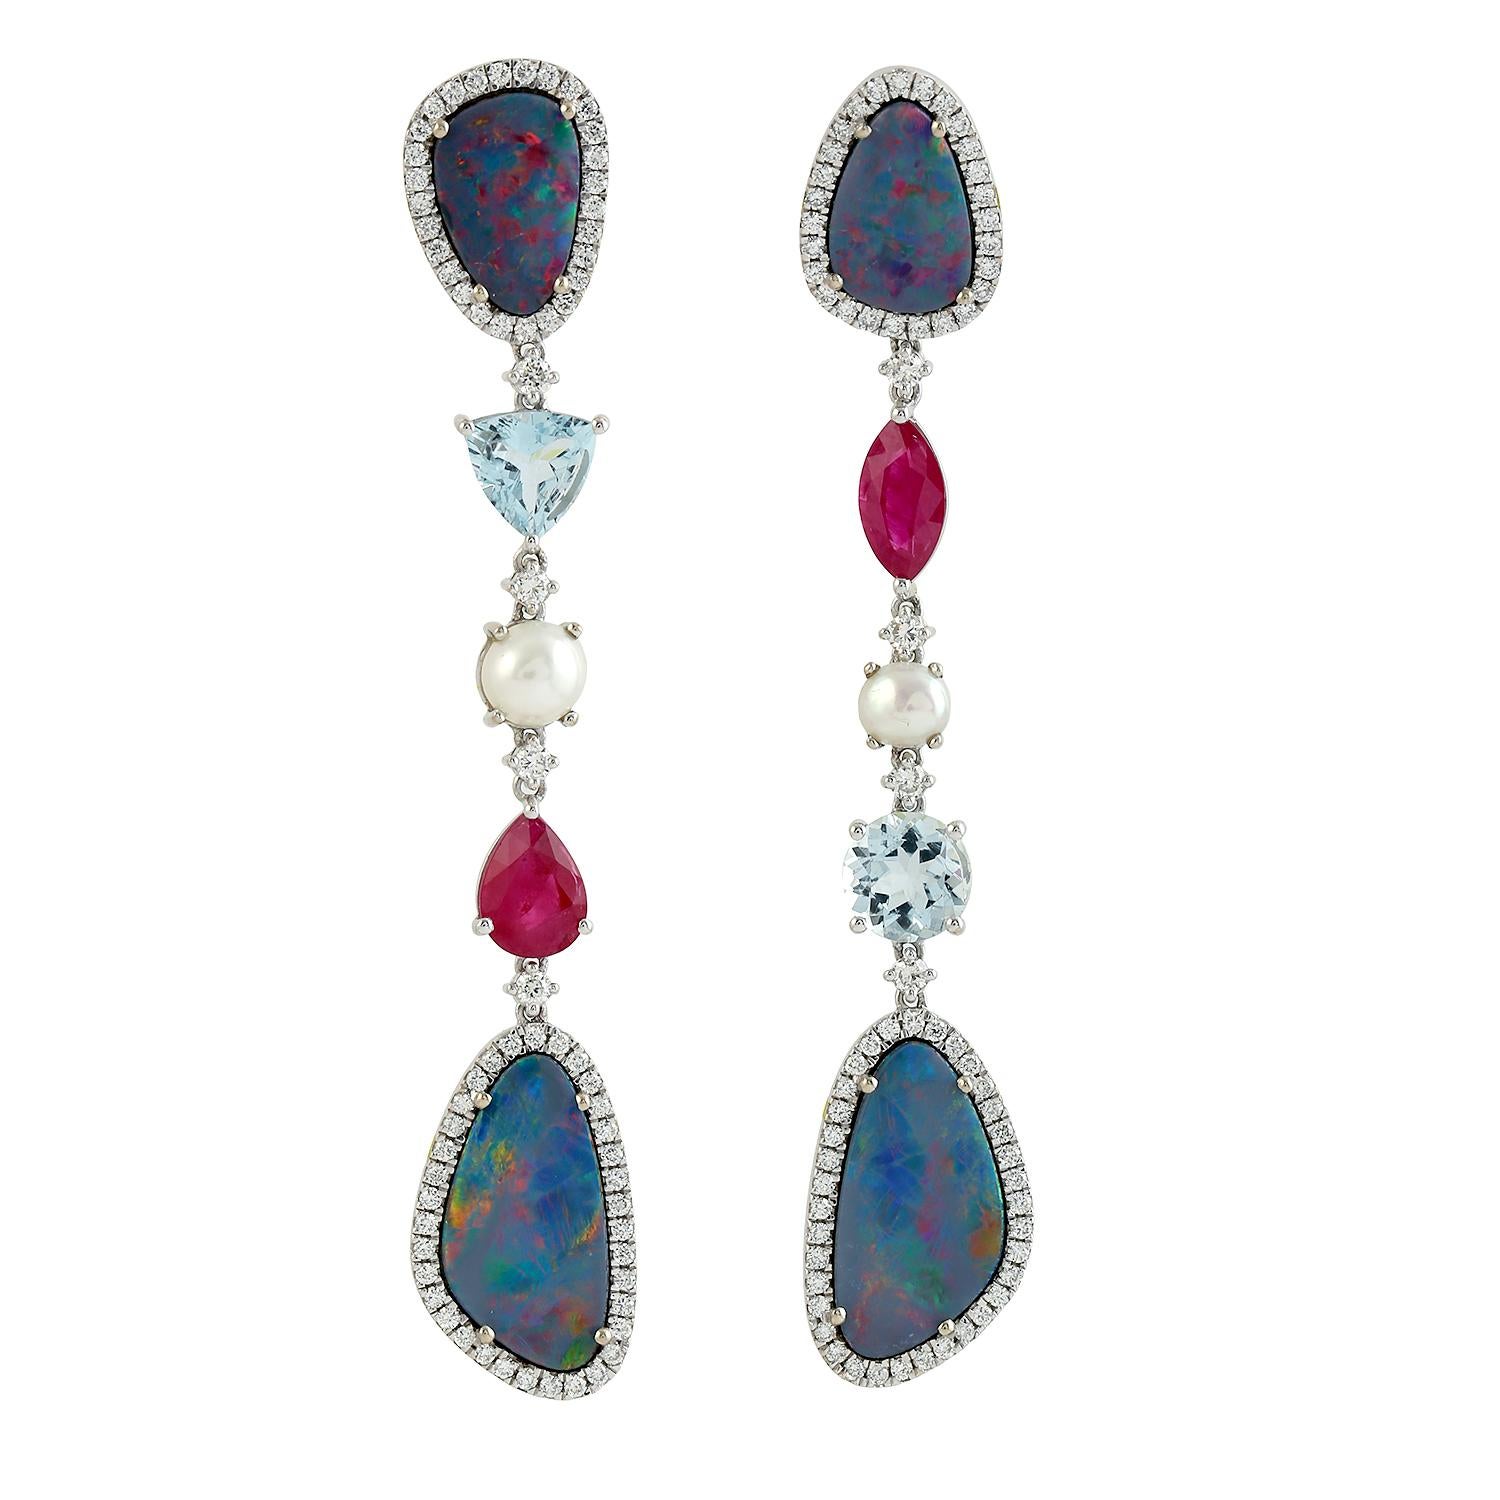 Mixed Cut Doublet Opal Earrings Accented With Multi Gemstones & Diamonds In 18k White Gold For Sale